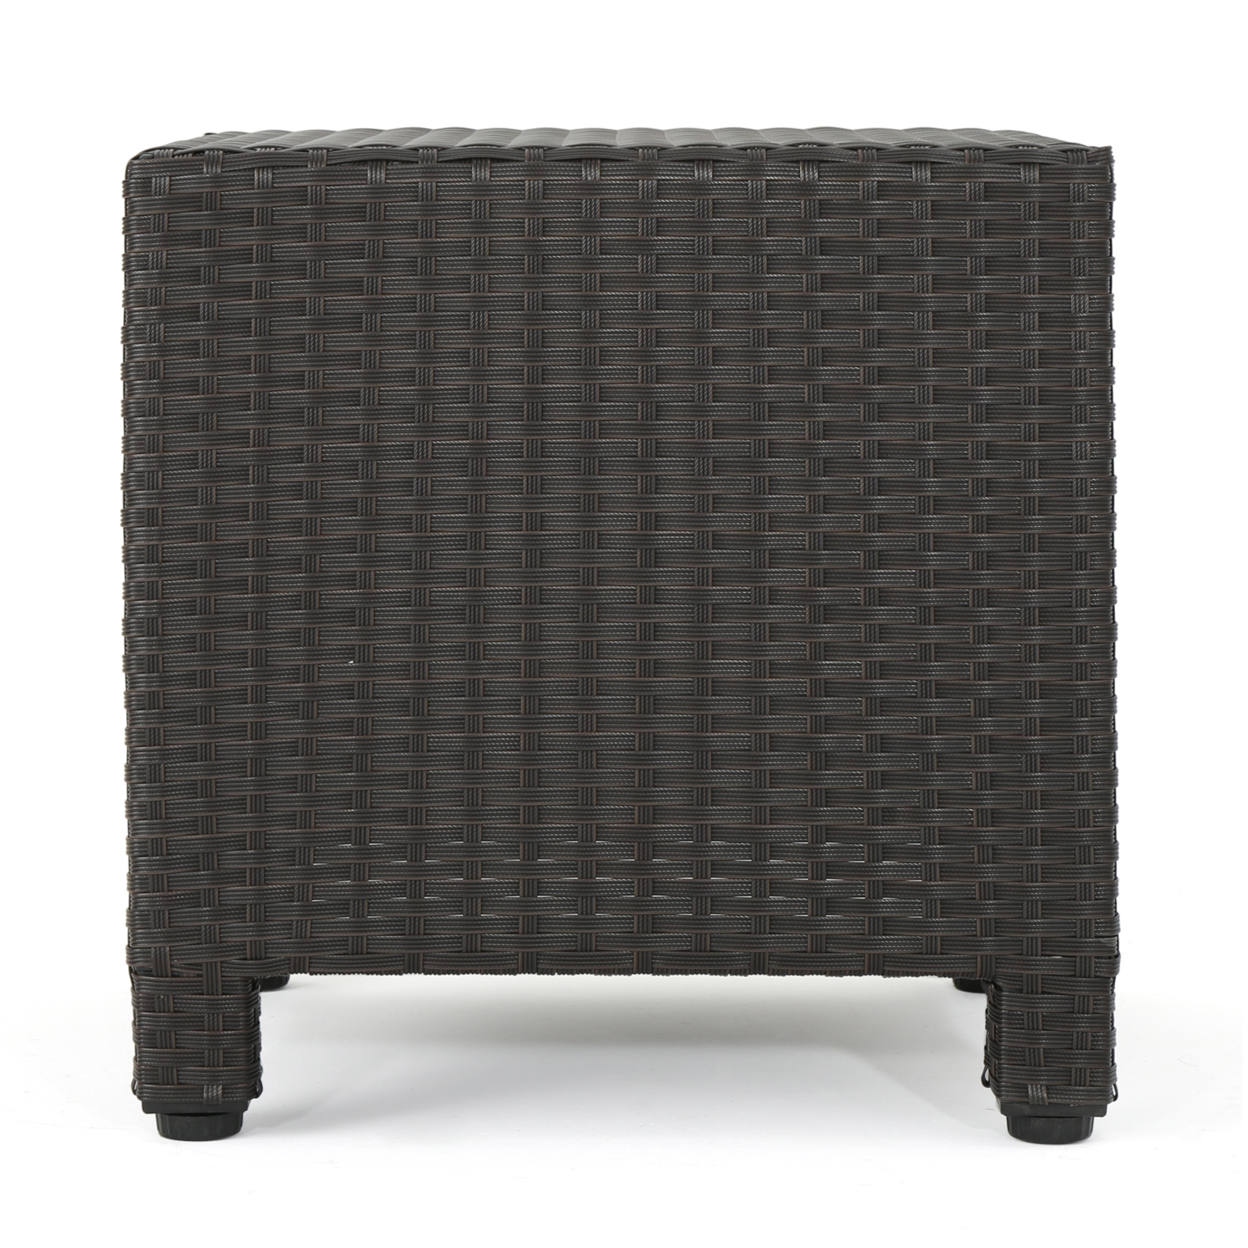 Bonnie Outdoor 5 Seater Wicker Sofa Chat Set With Ottomans - Mix Black + Dark Gray